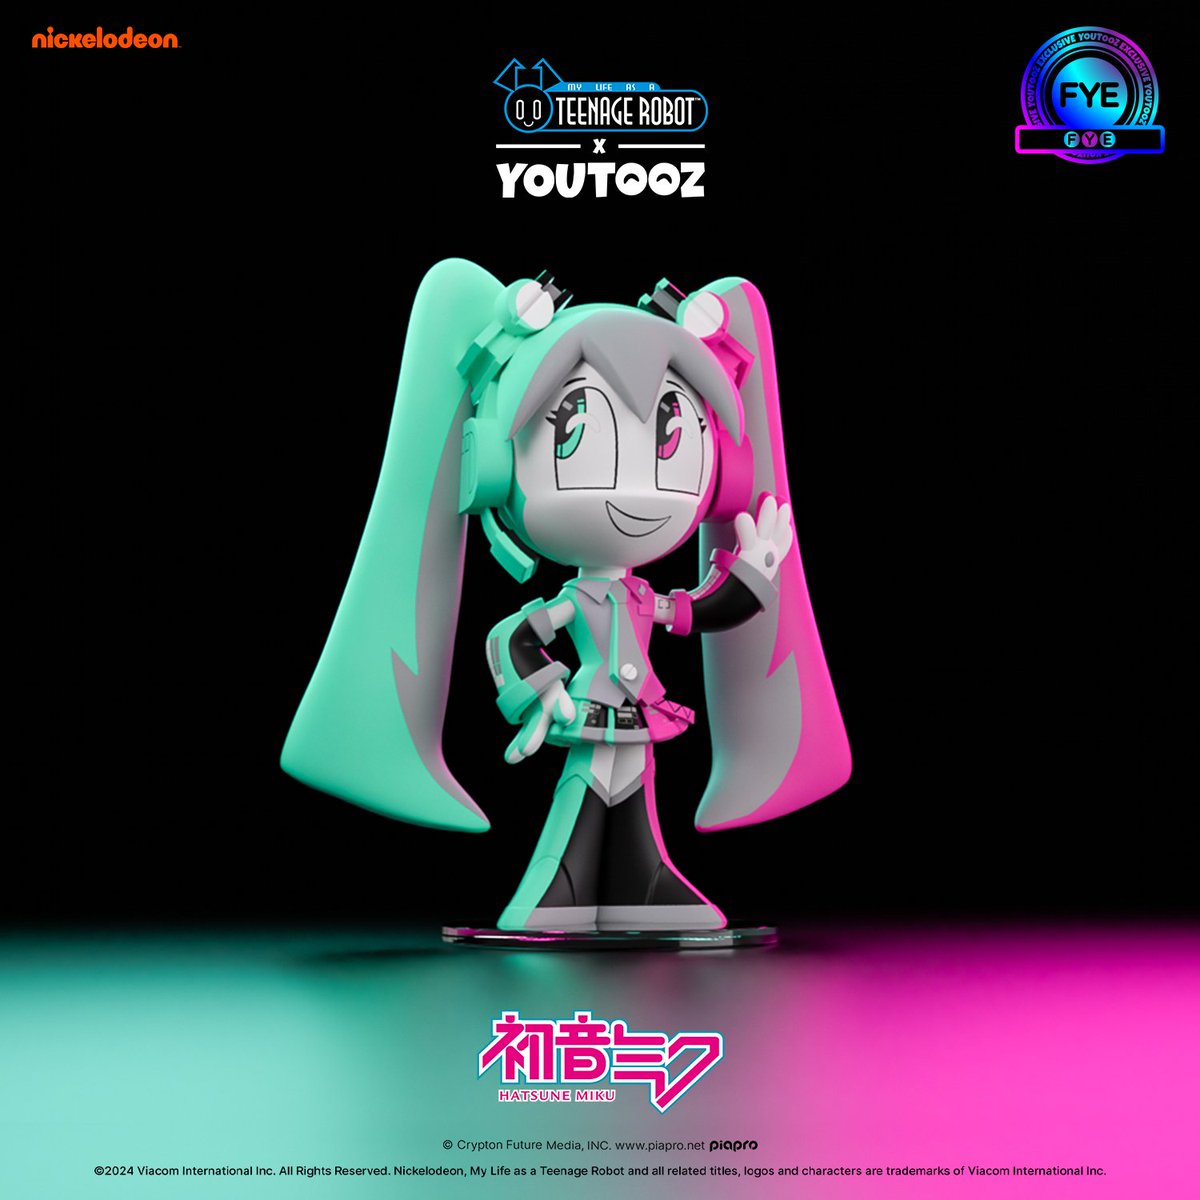 let me bake you a lasagna! 🍝 introducing hatsune miku x garfield x youtooz dropping may 24th at 3pm est alongside all new fye exclusives 💙